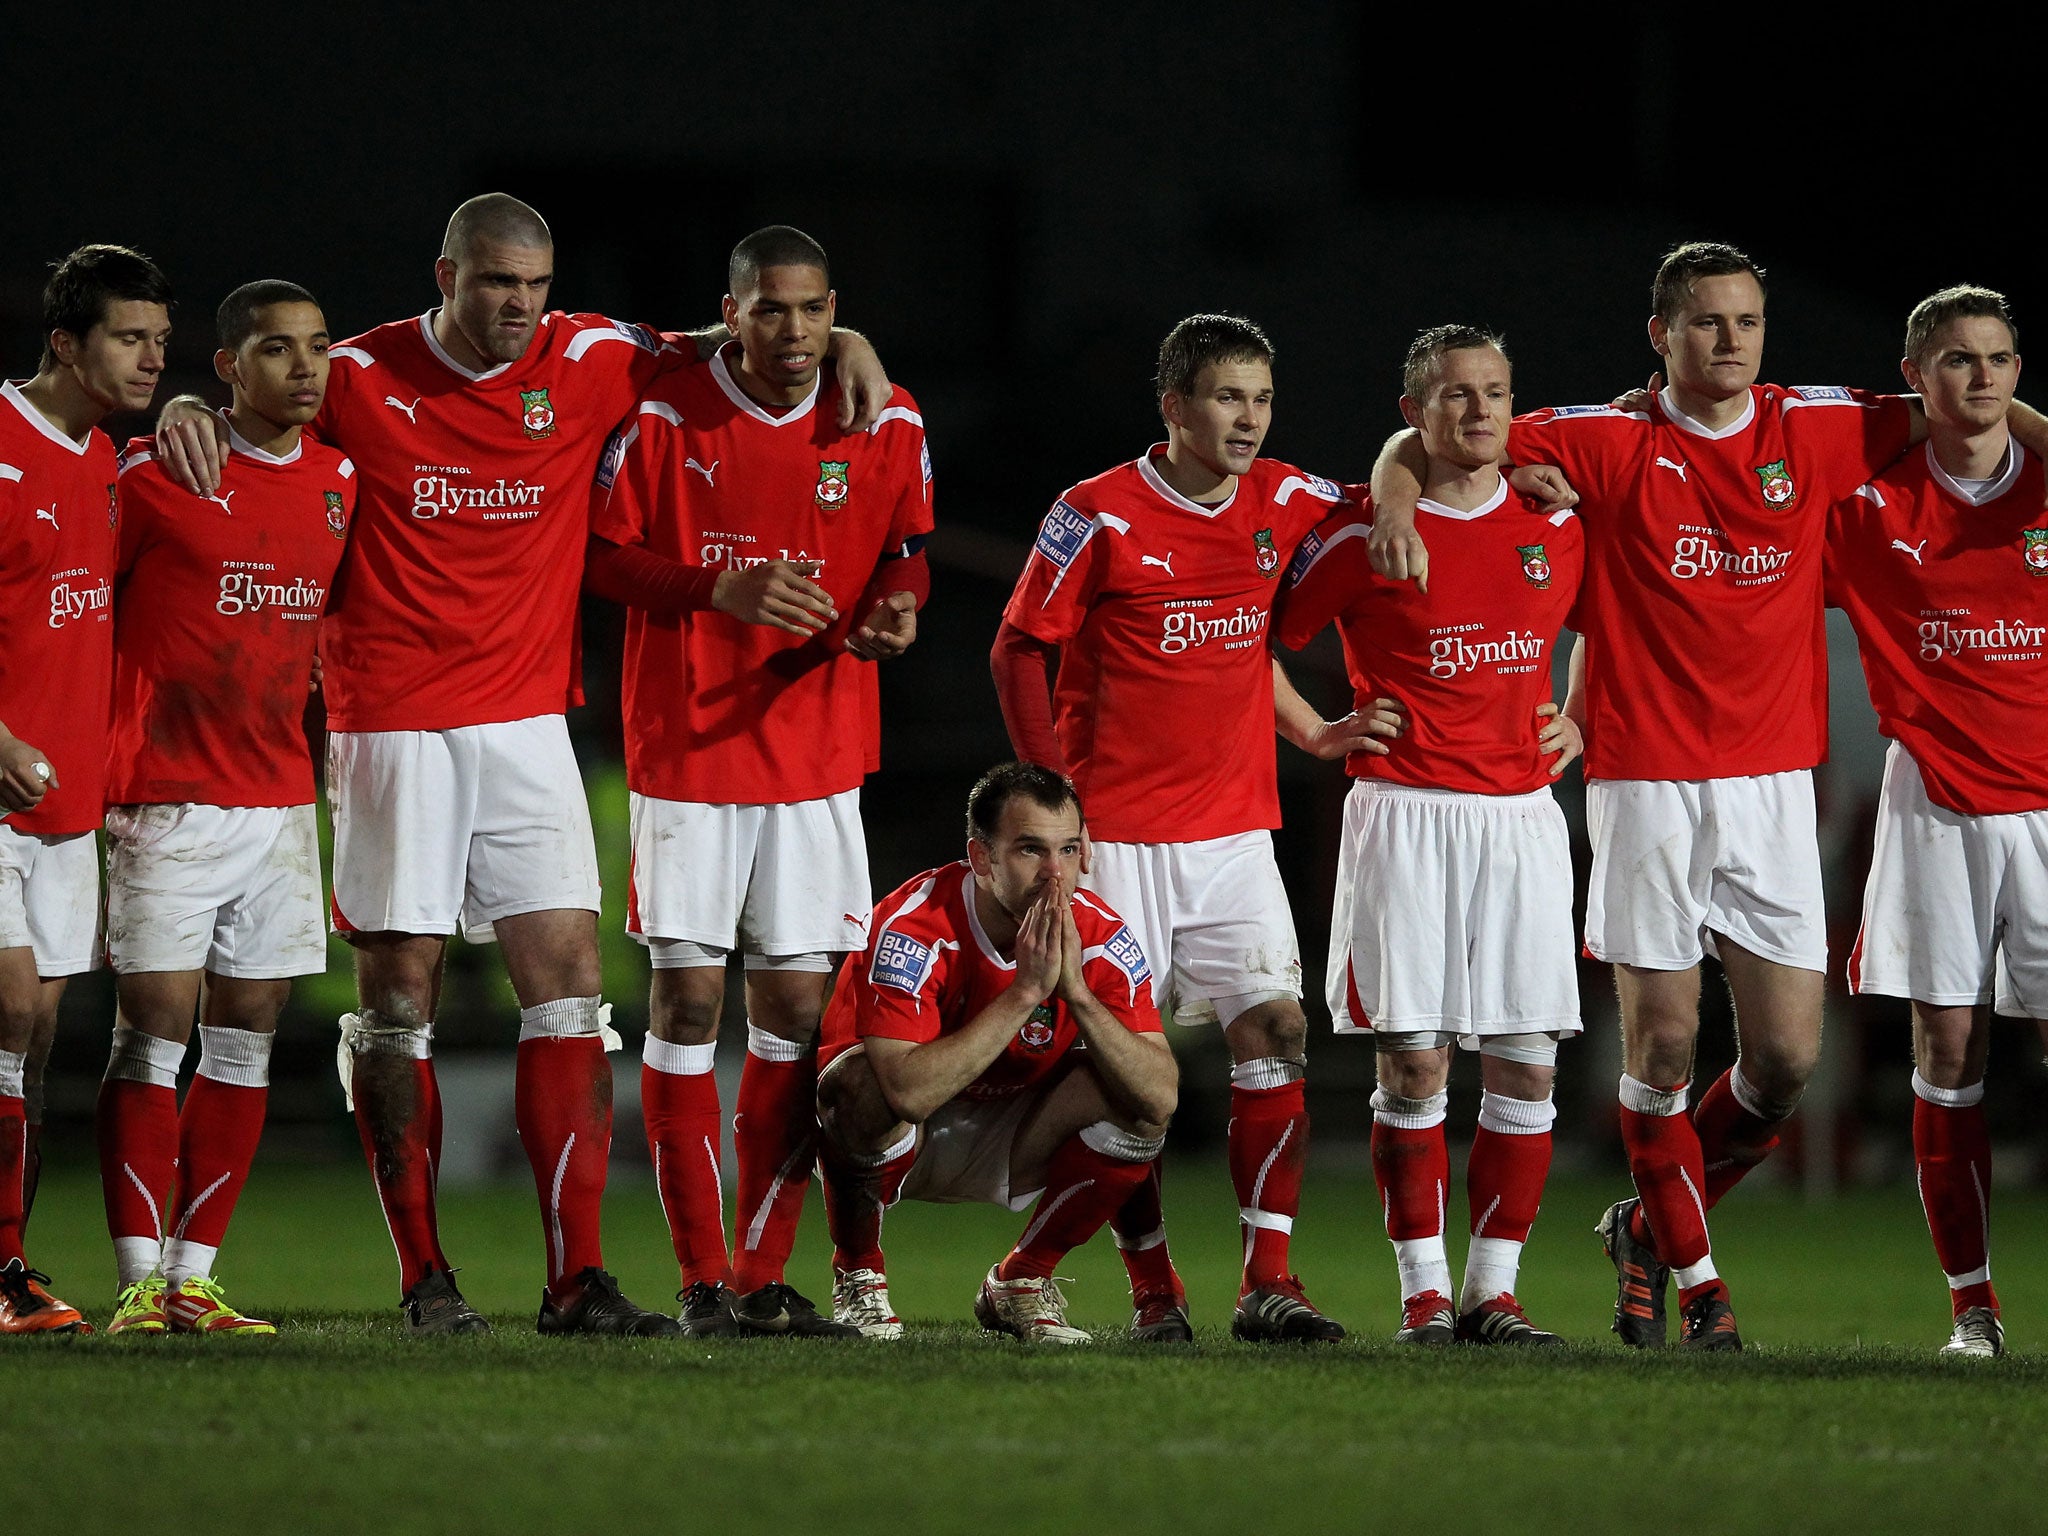 Interested in a football manager? Look no further than Wrexham